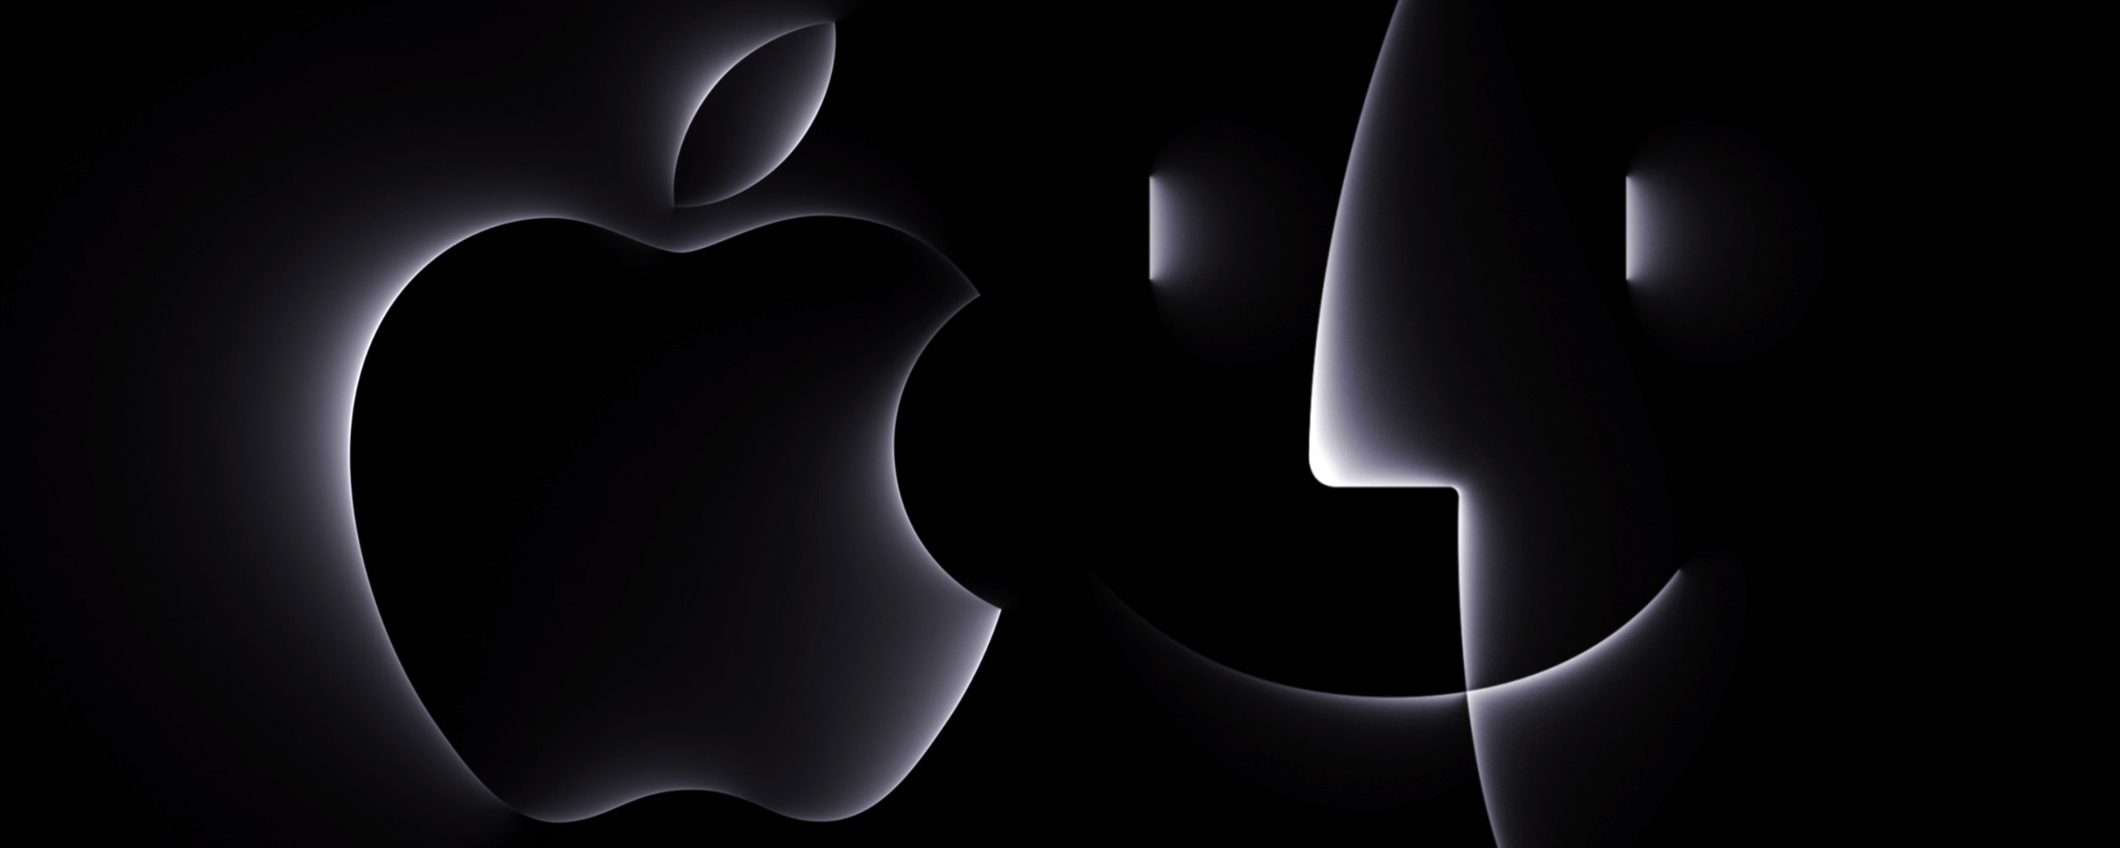 Scary Fast: come vedere l'evento Apple in streaming